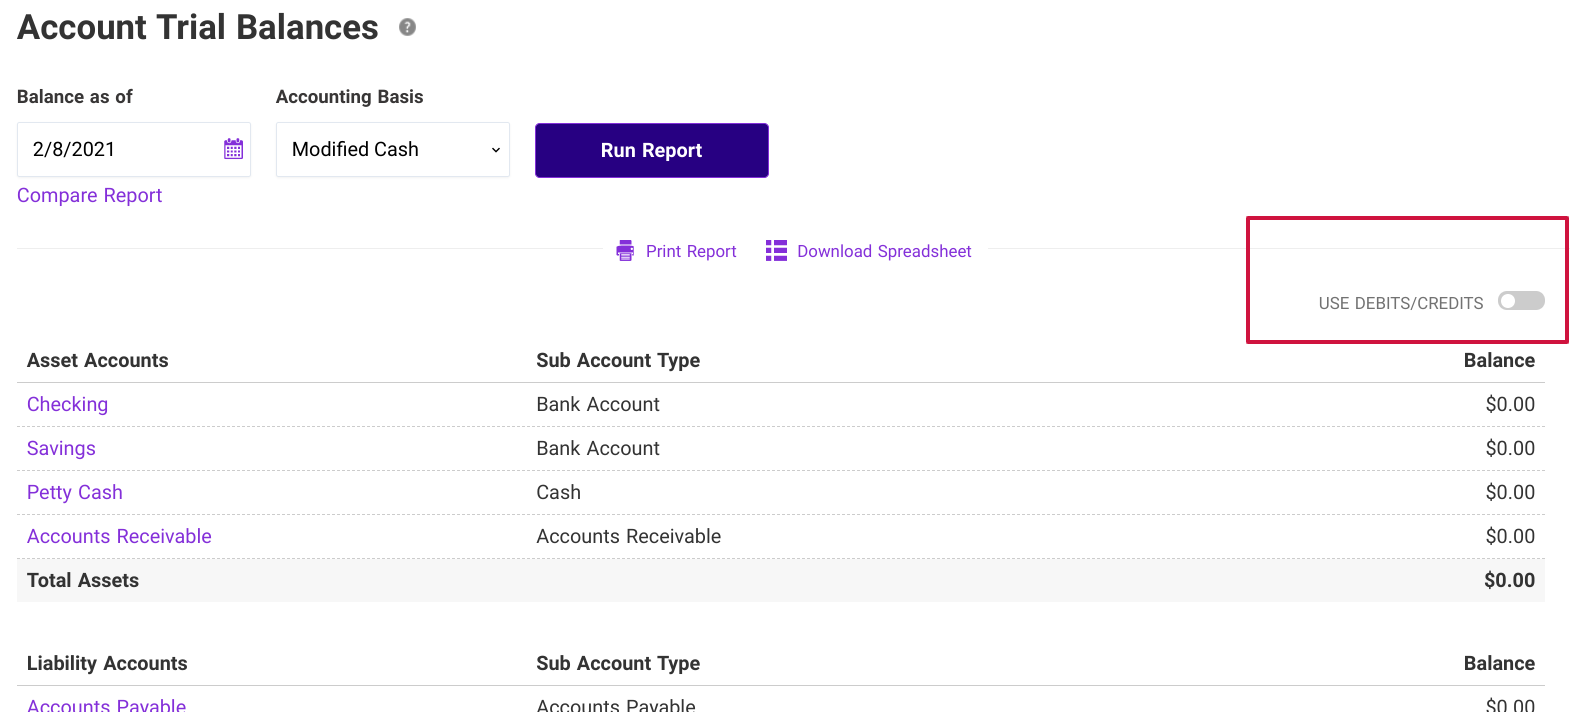 Account trial balances page highlighting the debits/credits toggle